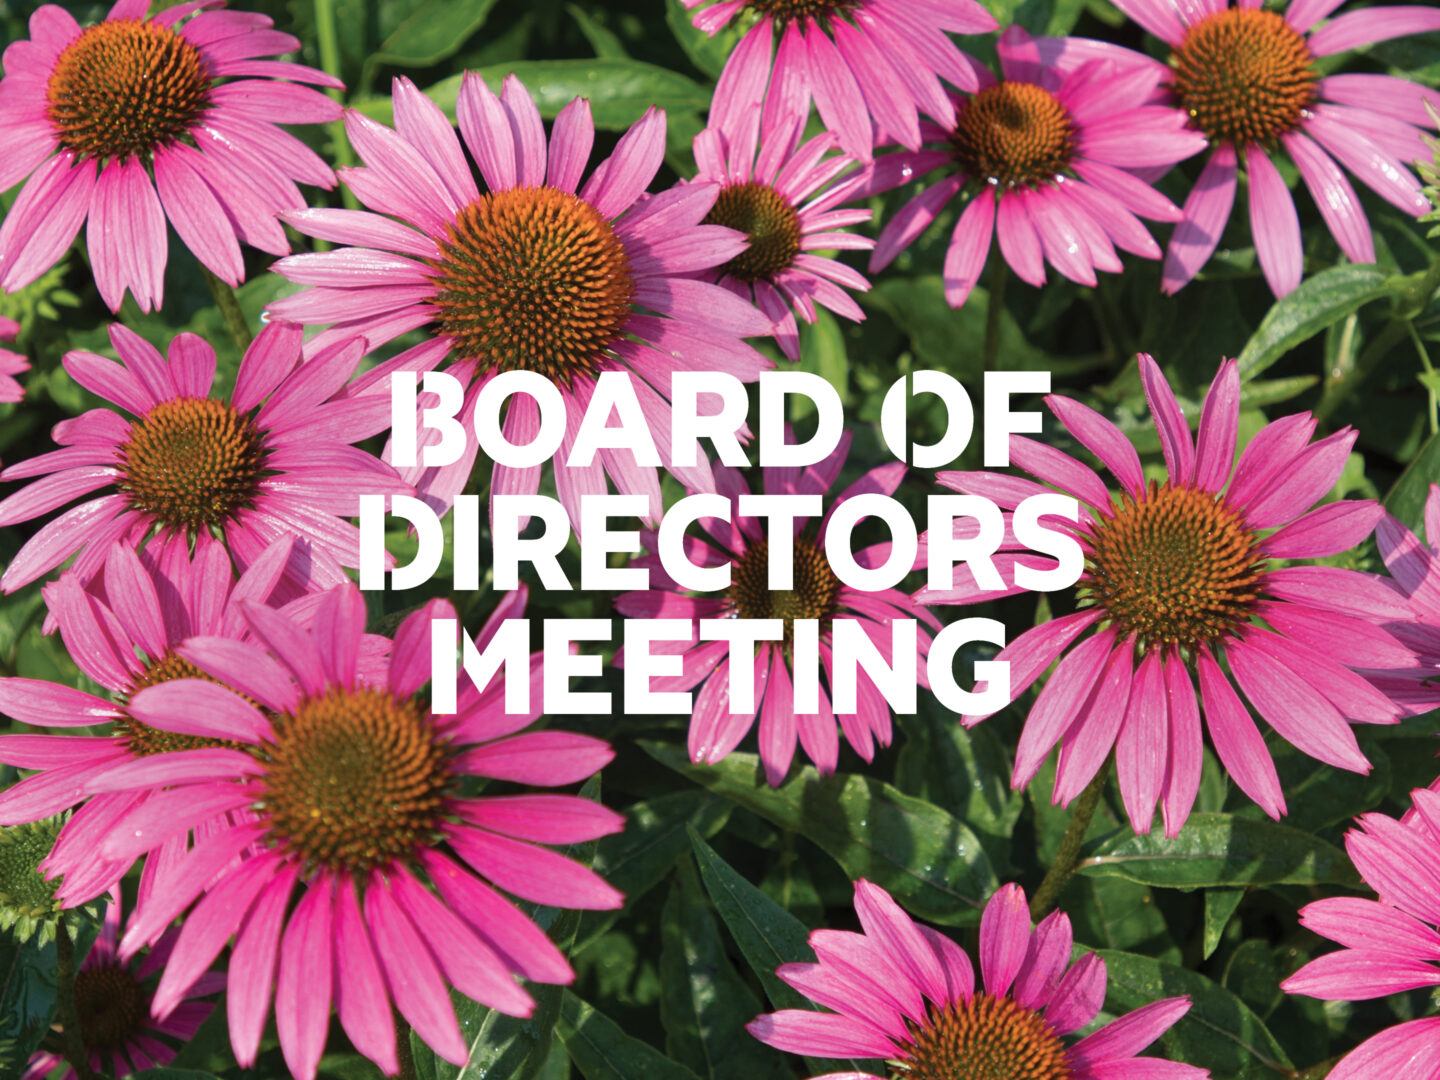 Pink coneflowers with text reading "Board of Directors Meeting" overlaid